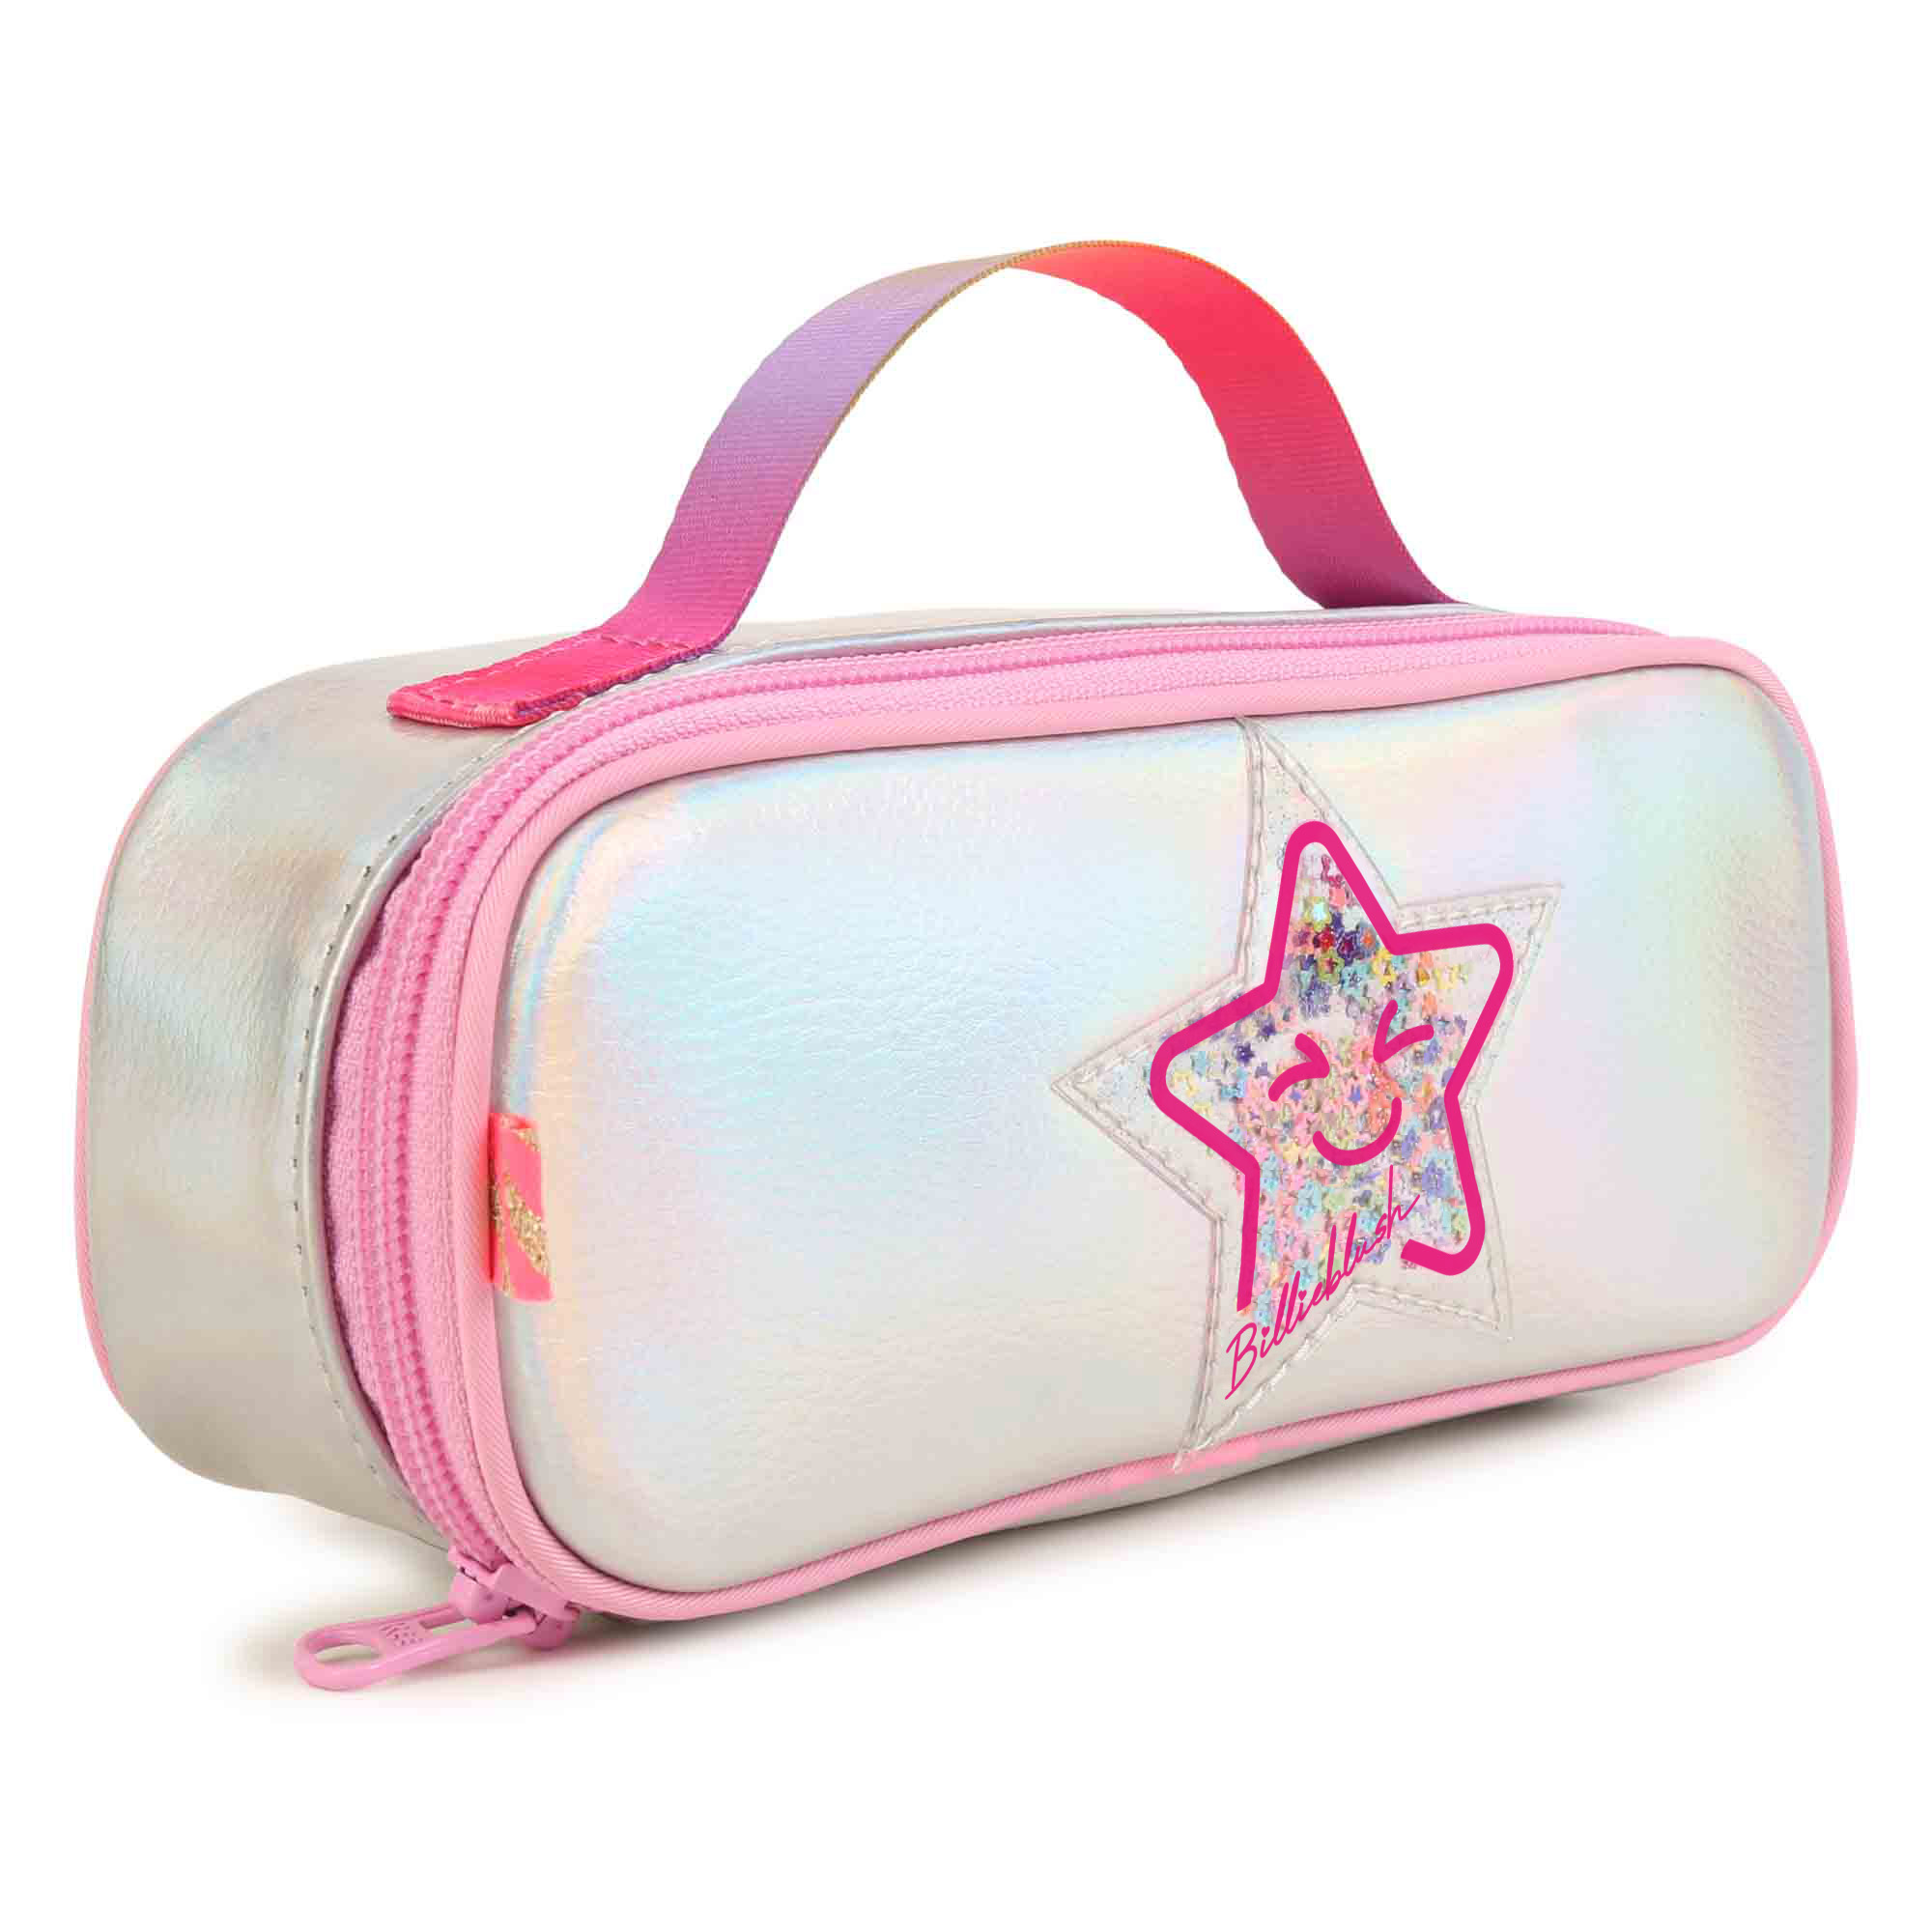 Iridescent pouch with stars BILLIEBLUSH for GIRL